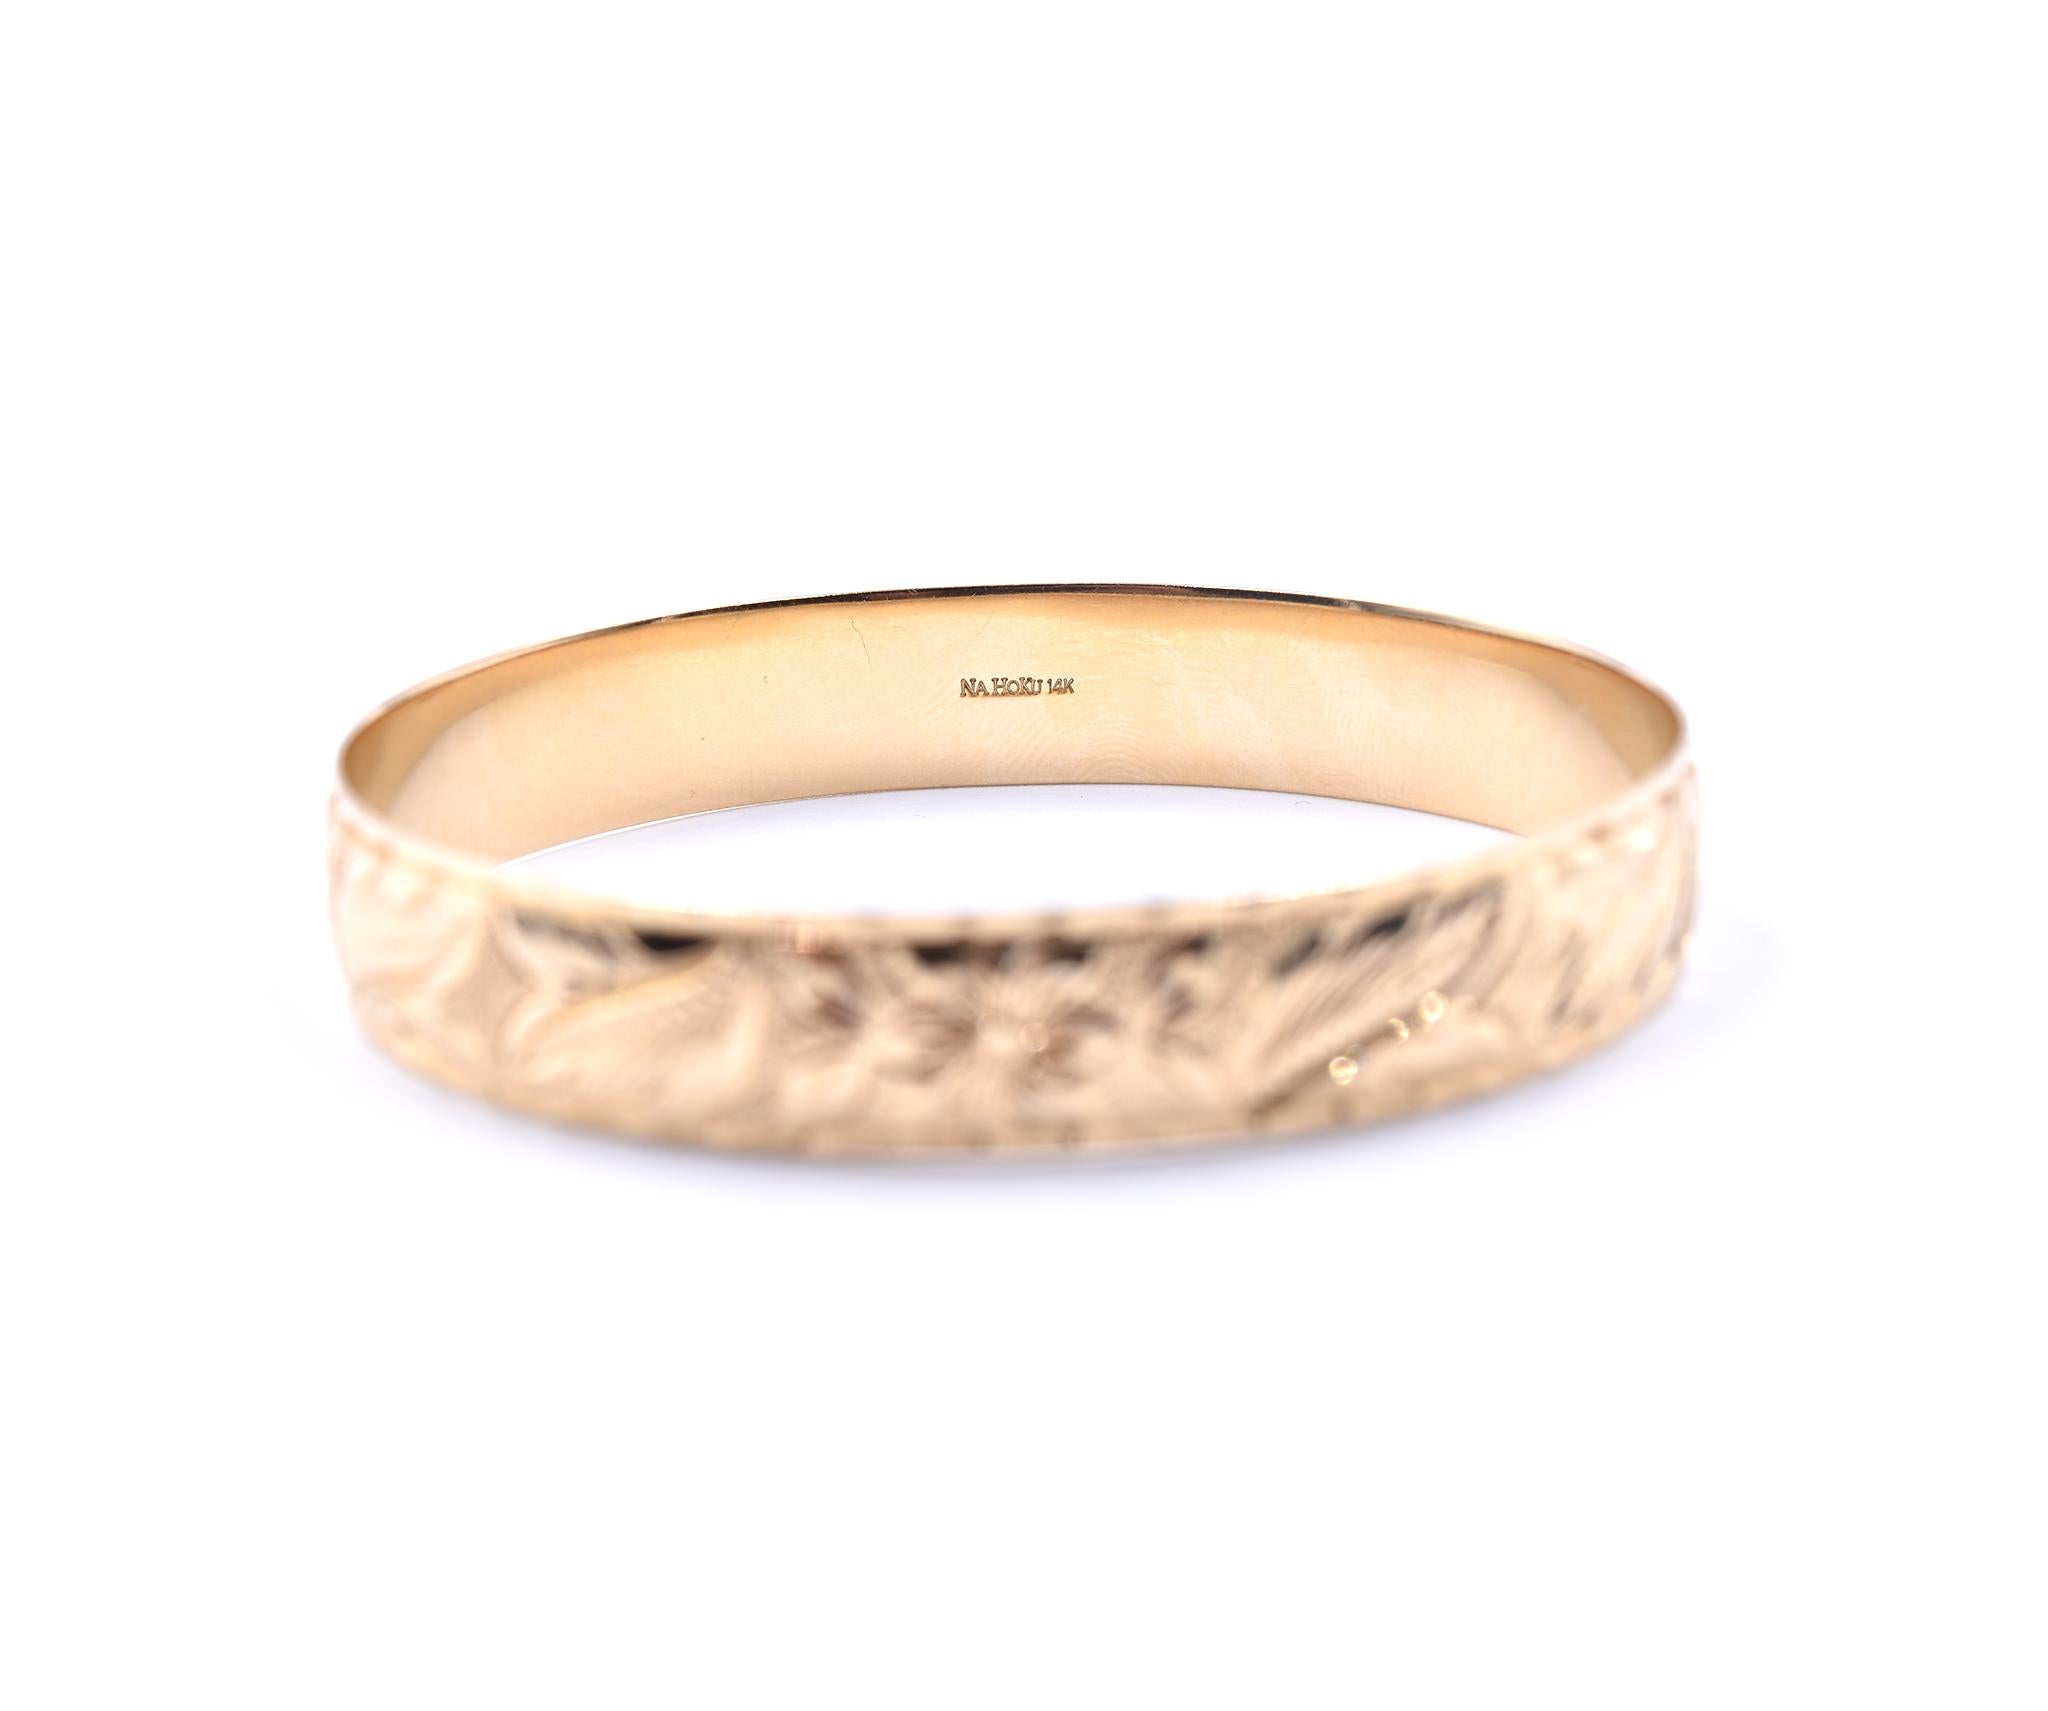 Designer: Nahoku
Material: 14k yellow gold
Dimensions: bracelet will fir an 8-inch wrist and it is 12mm wide
Weight: 36.94 grams